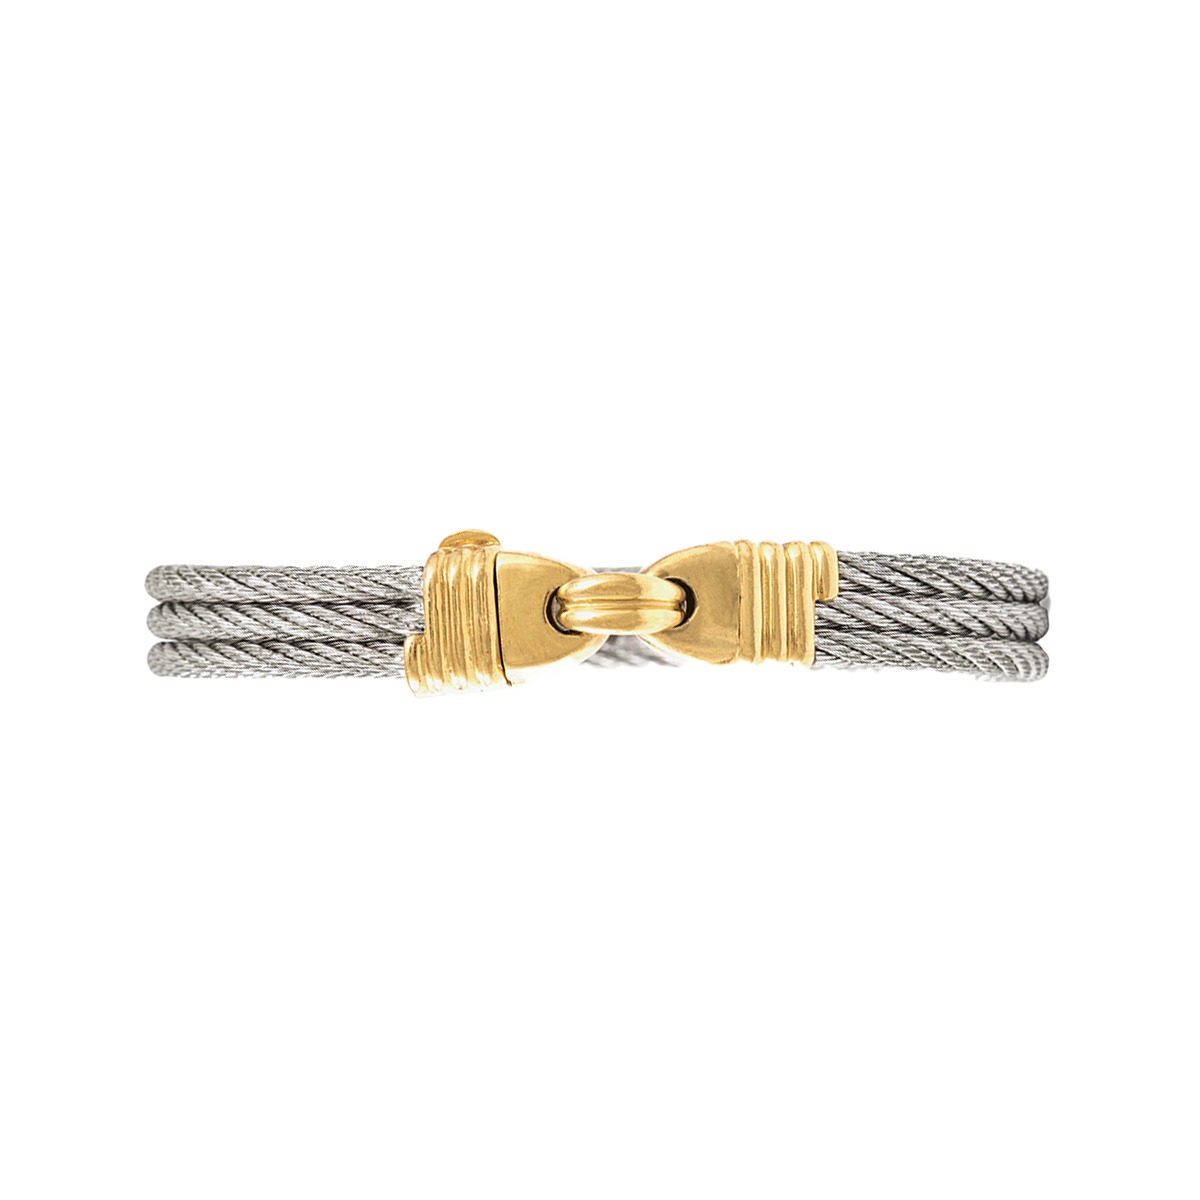 Front shot of the Fred Force 10 Gold and Steel Bracelet